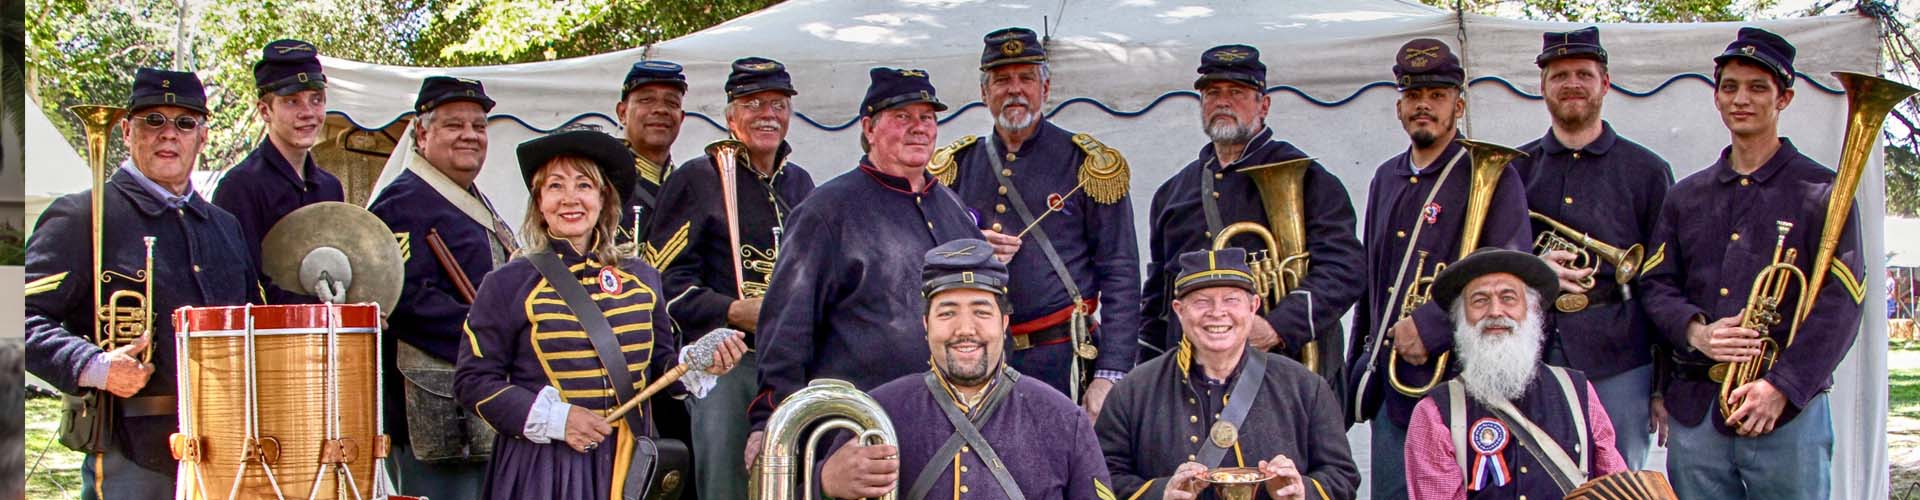 Authentic Recreated Union Civil War Brass Band